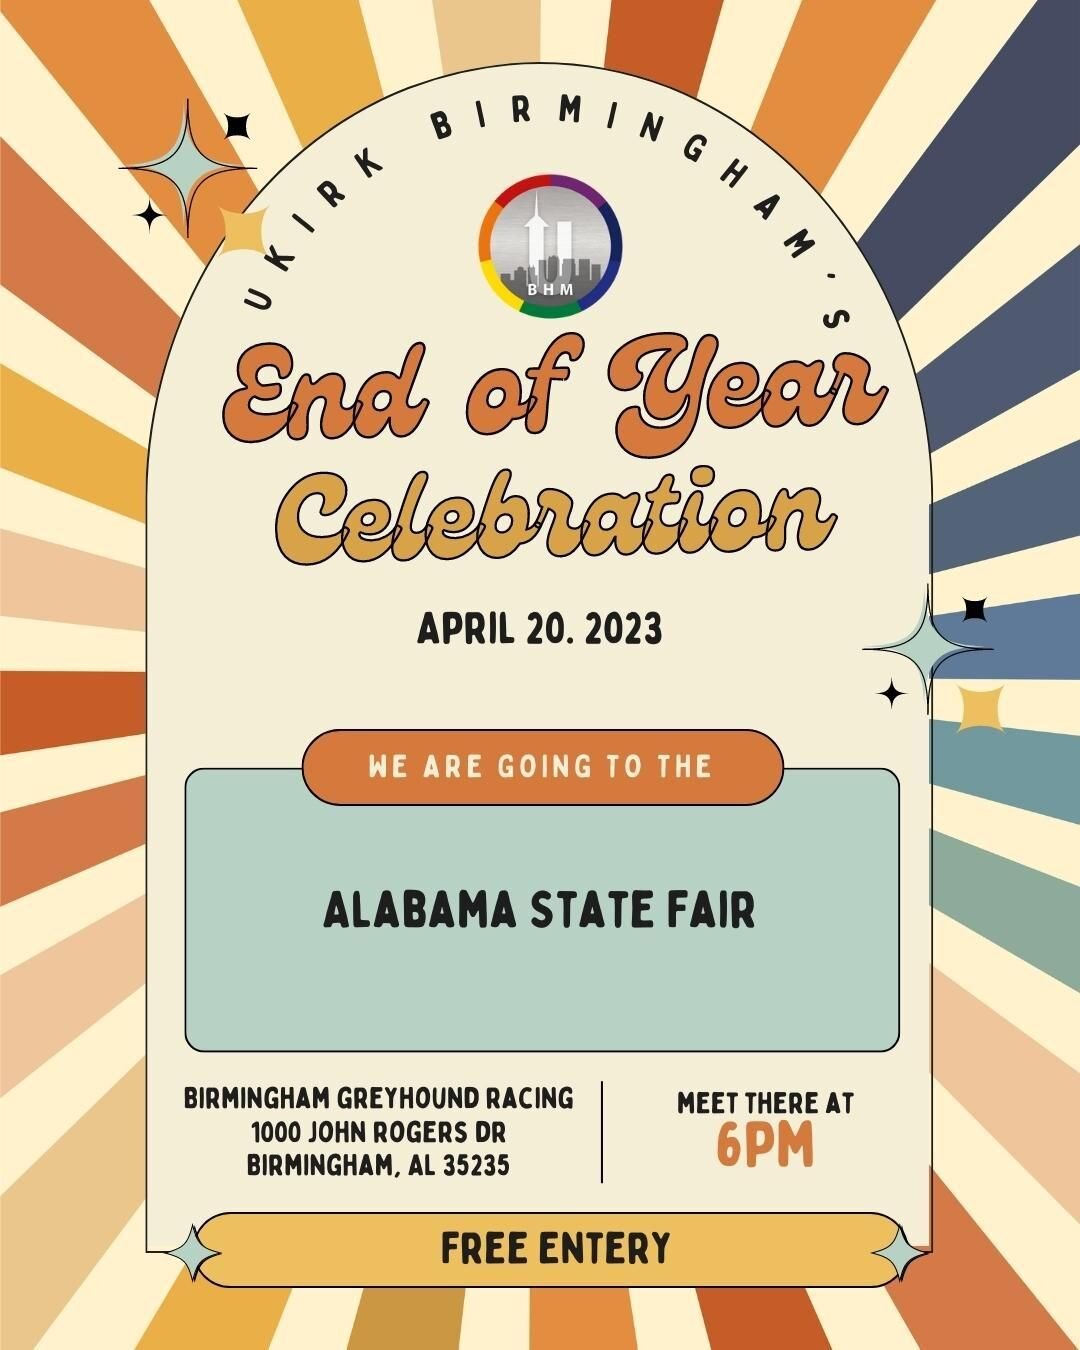 UKirk Birmingham wants to celebrate the end of the school year with you! We will be going to the Alabama State fair on our last UKirk Thursday of the semester, April 20 (tomorrow), at 6pm. We will eat there and ride until our heart is content. Hope y